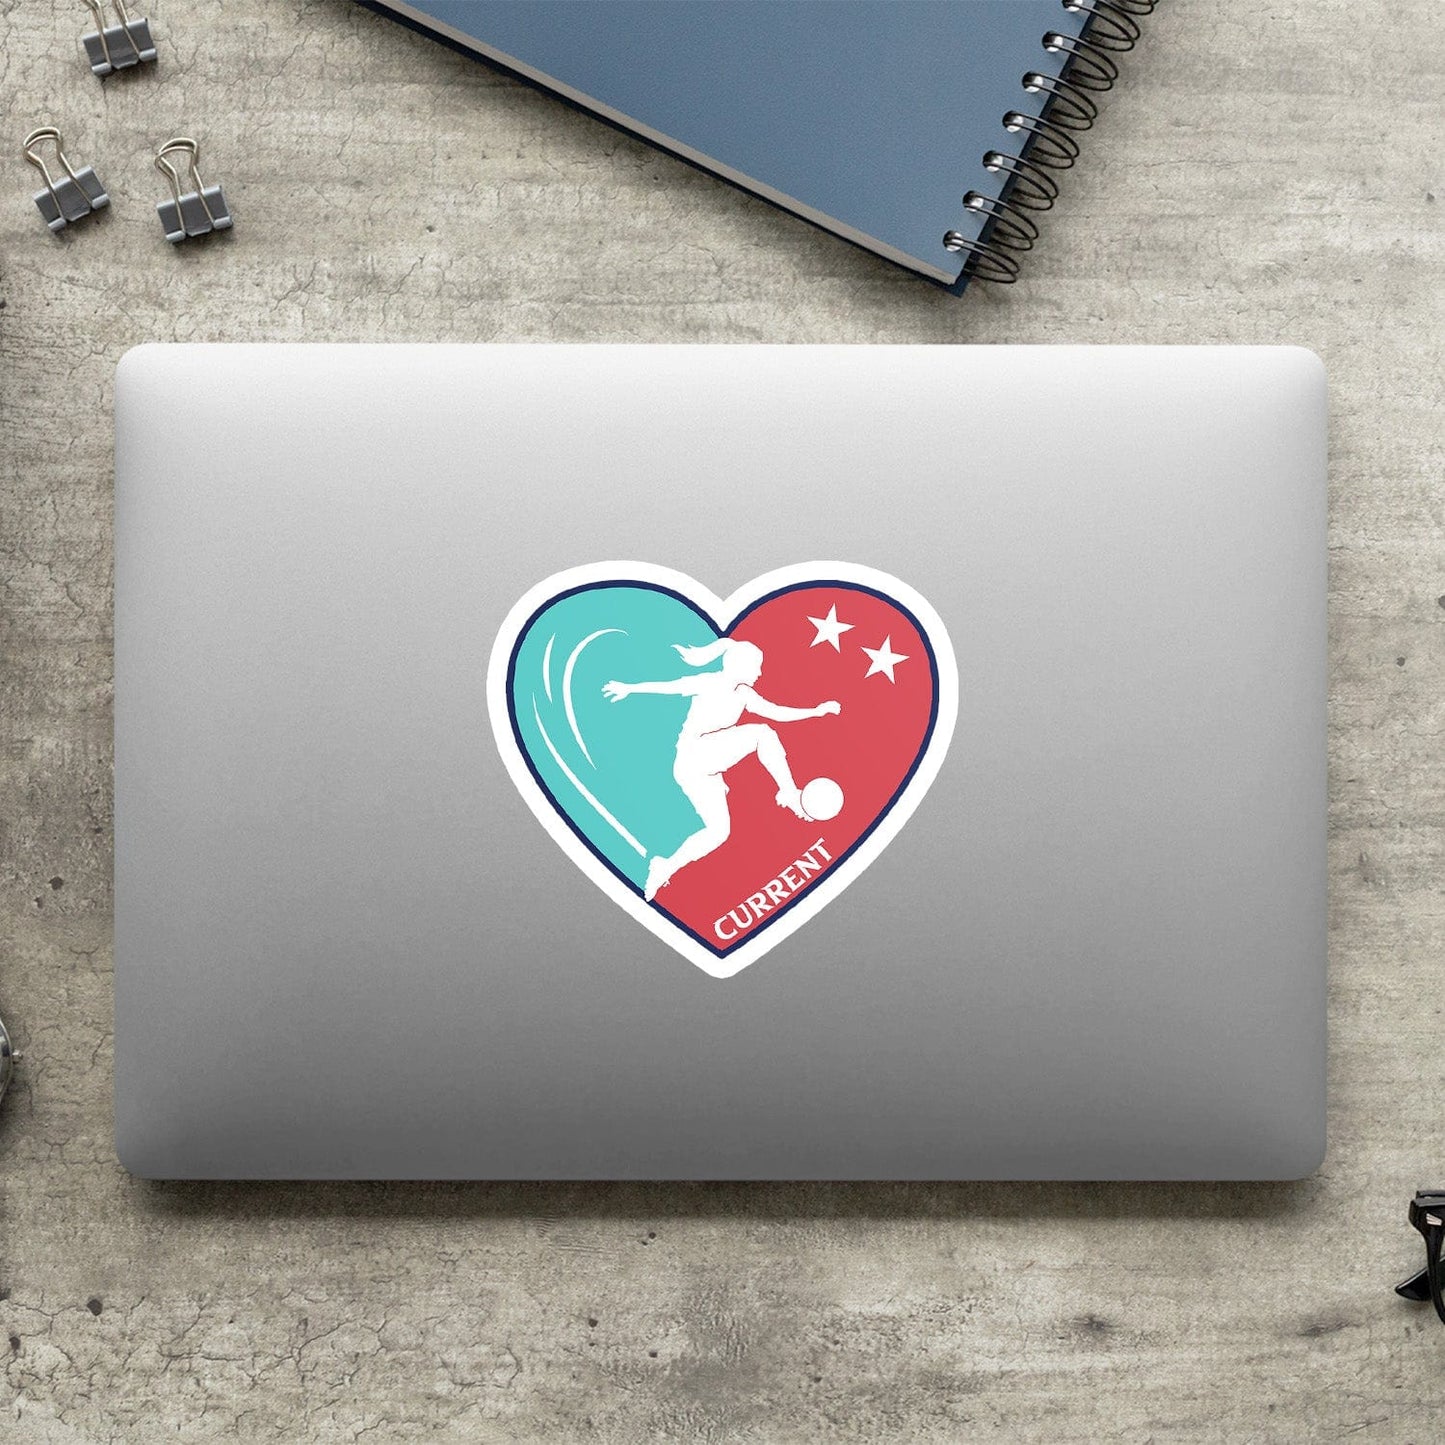 KC Swag Kansas City Current PLAYER HEART die-cut sticker decal made from waterproof vinyl on closed laptop back